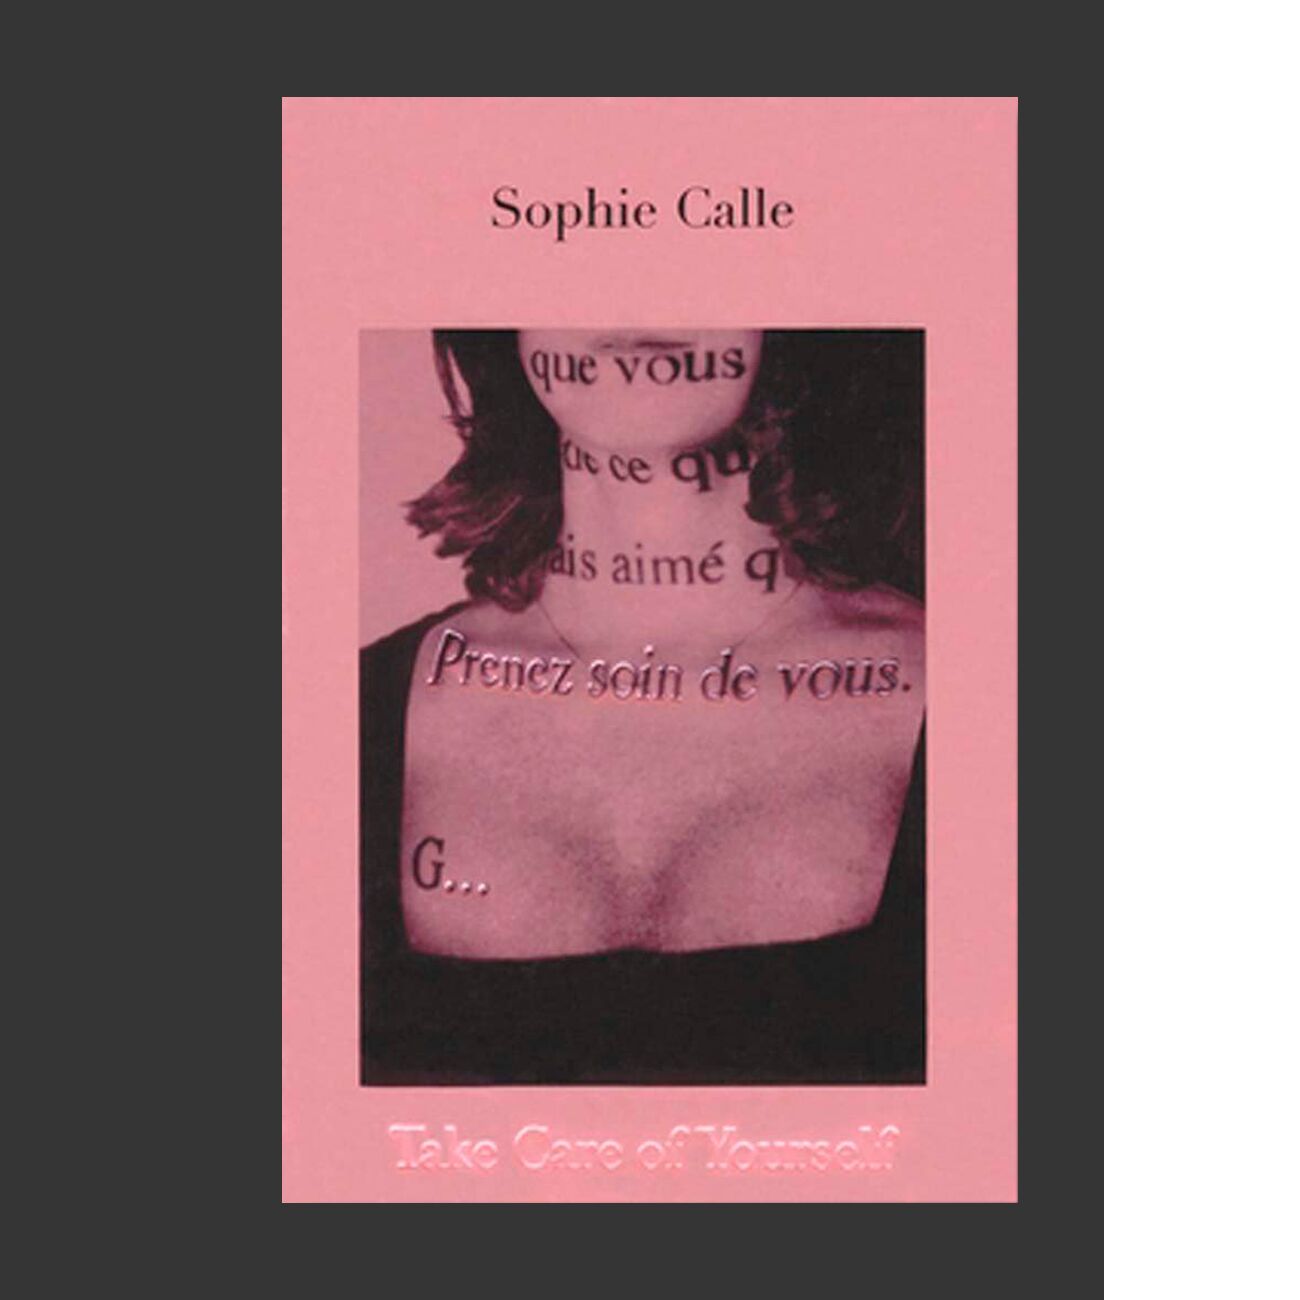 Sophie Calle: Take Care of Yourself